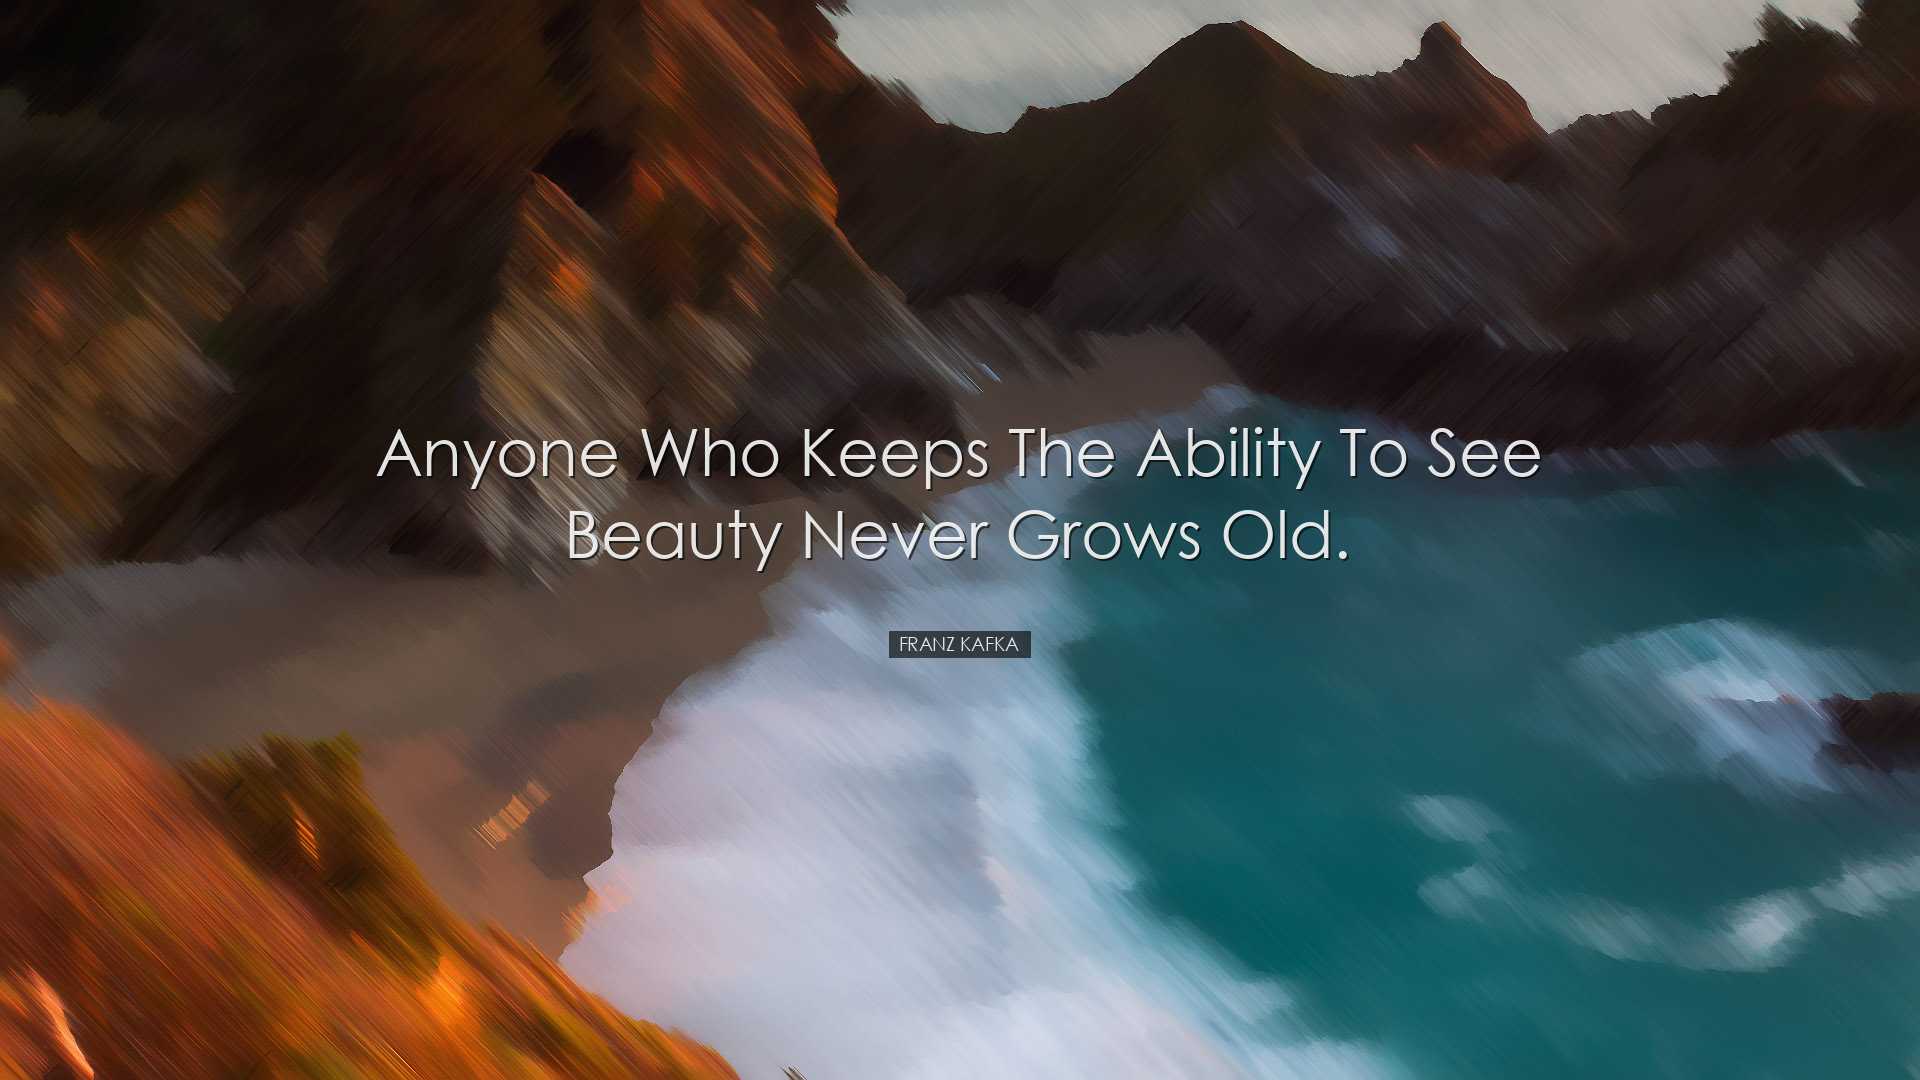 Anyone who keeps the ability to see beauty never grows old. - Fran